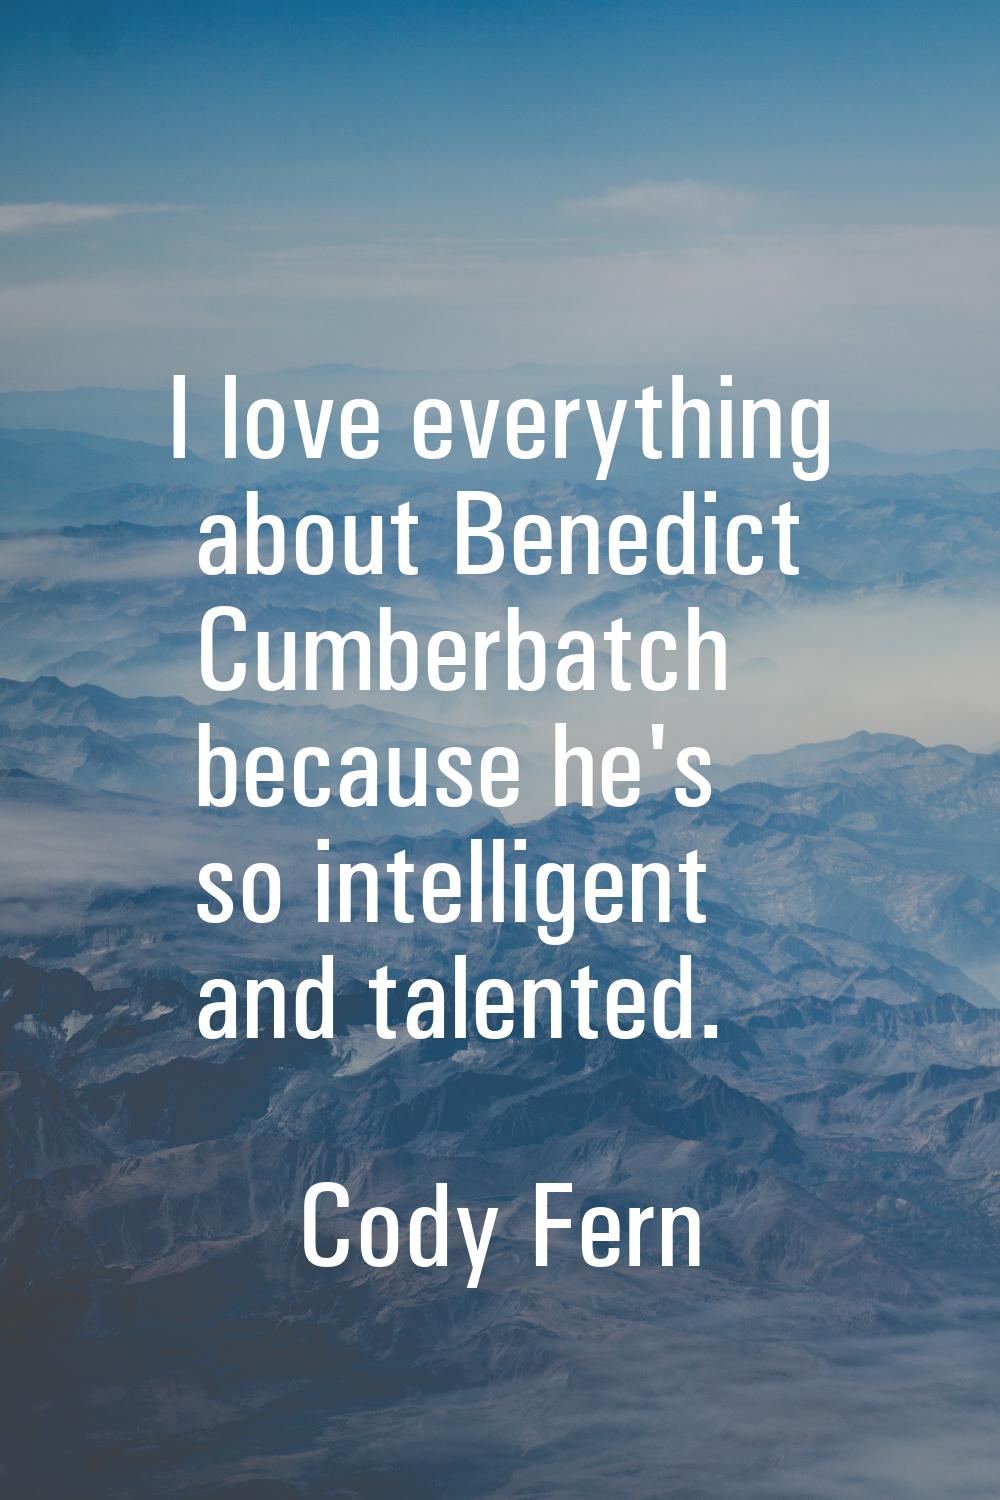 I love everything about Benedict Cumberbatch because he's so intelligent and talented.